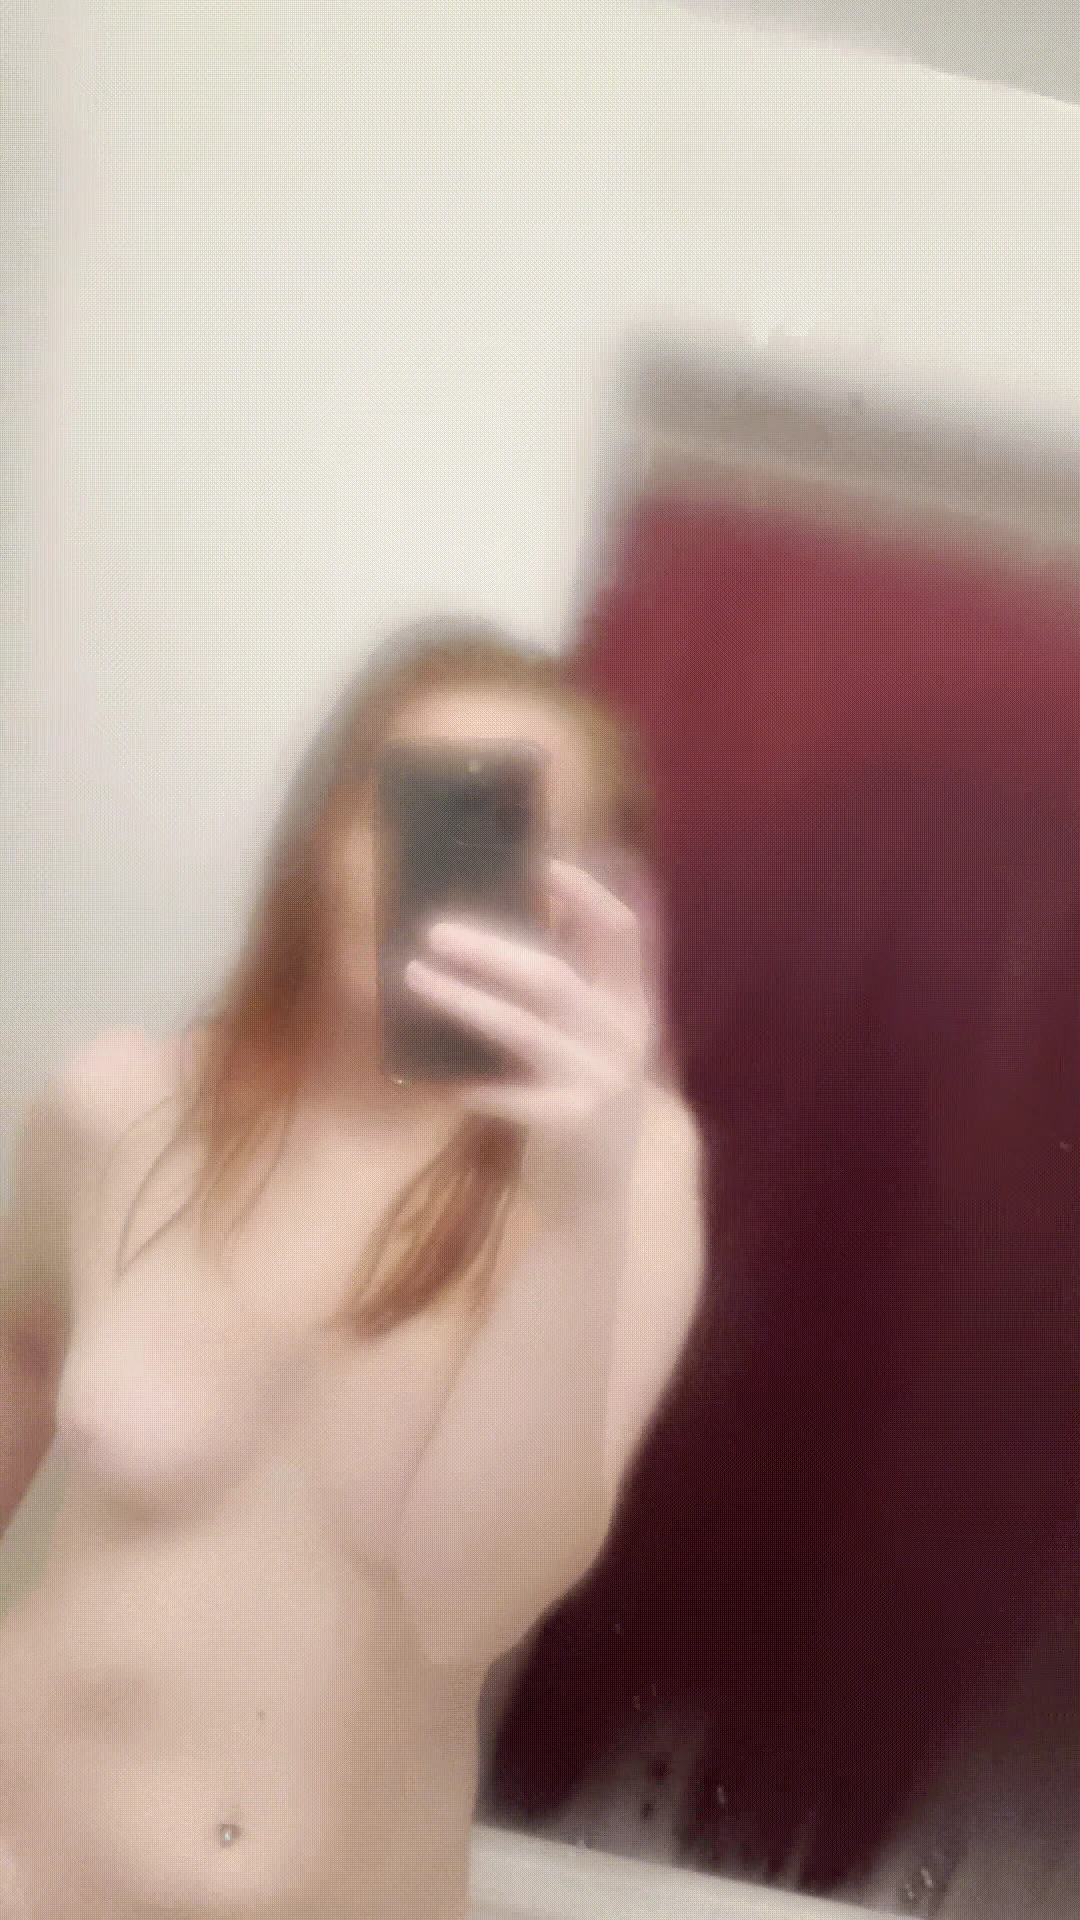 Can I let you in on a little secret? Nobody's ever seen me naked irl before- hopefully the internet likes me though